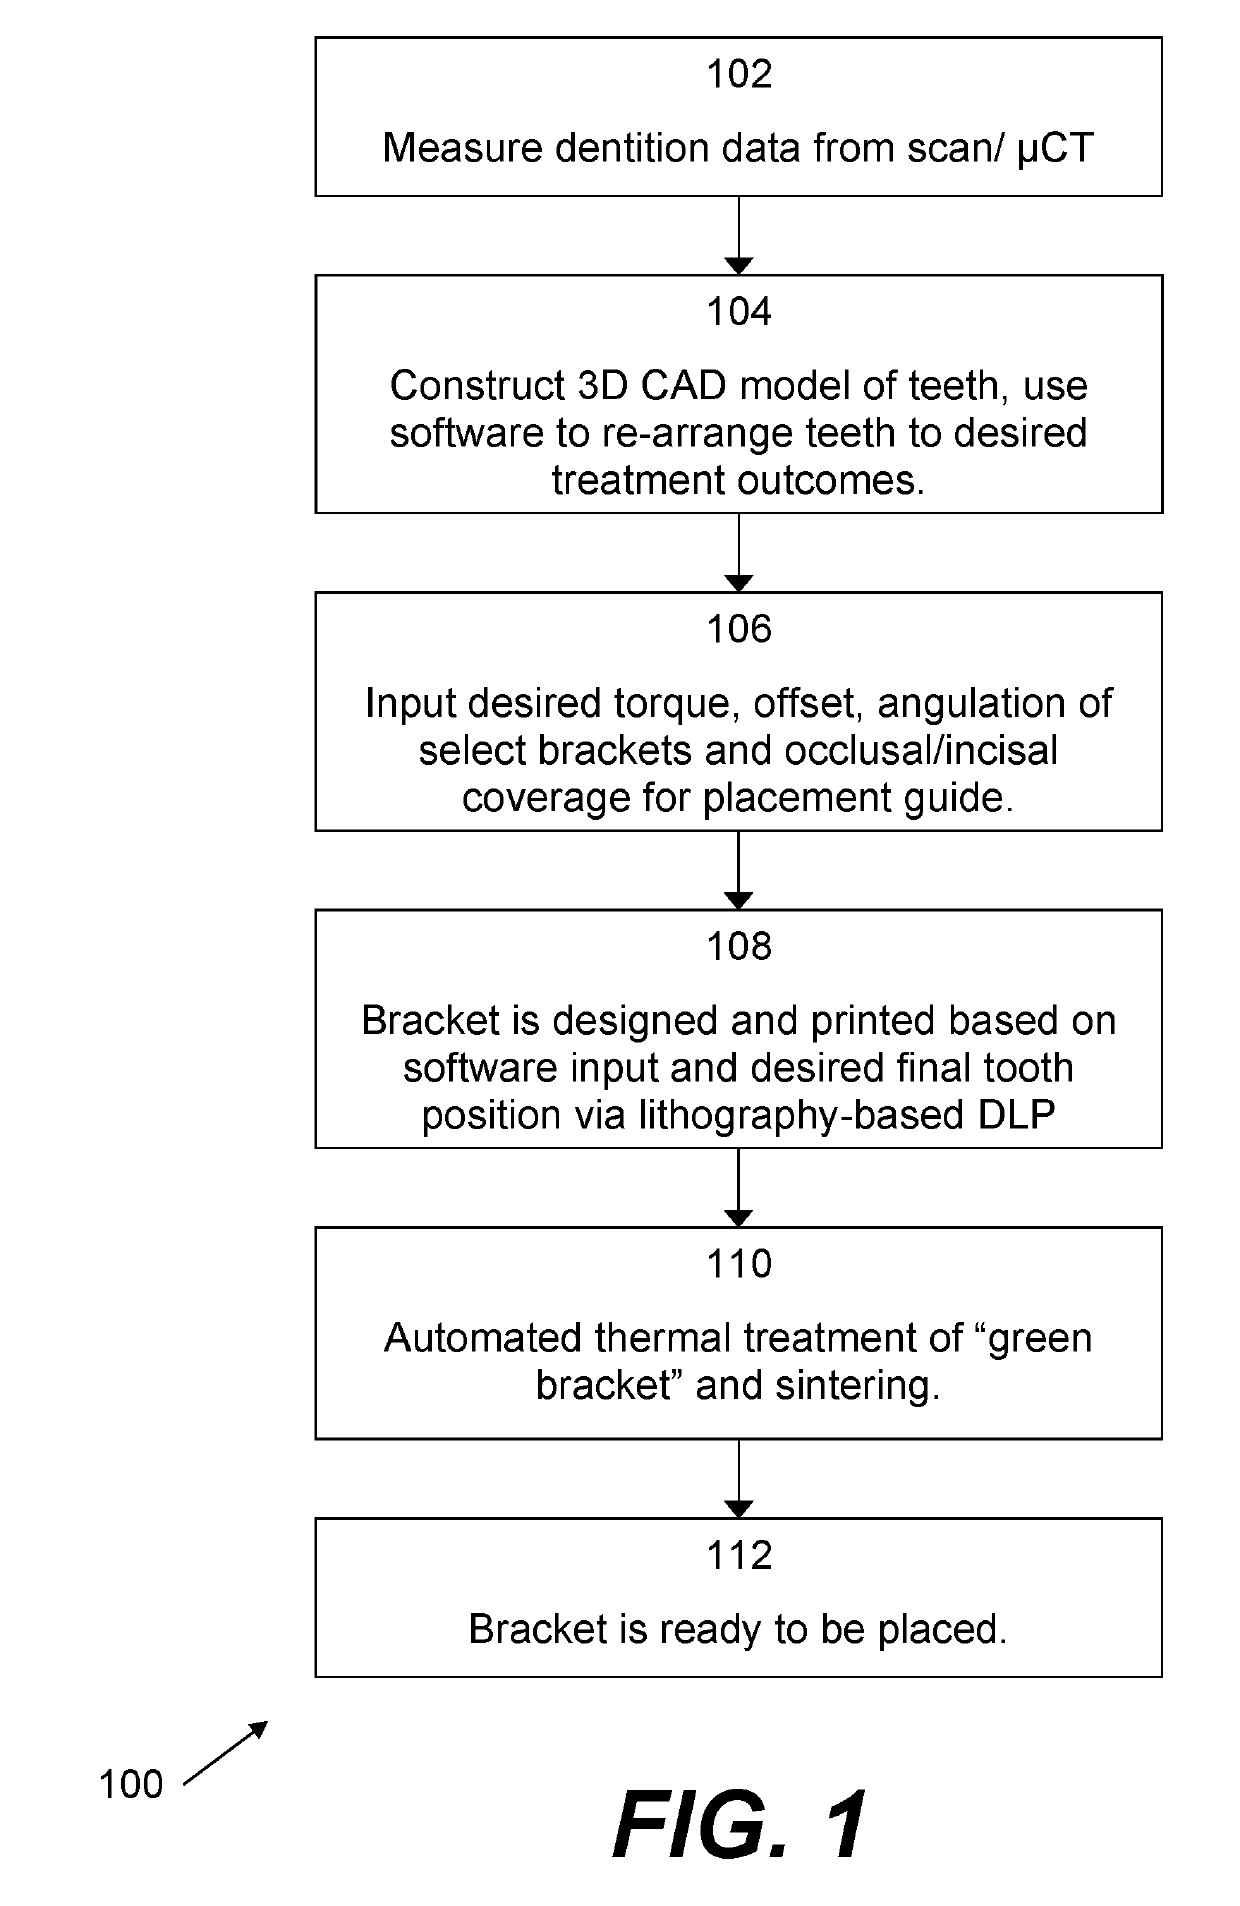 Manufacture of patient-specific orthodontic brackets with improved base and retentive features